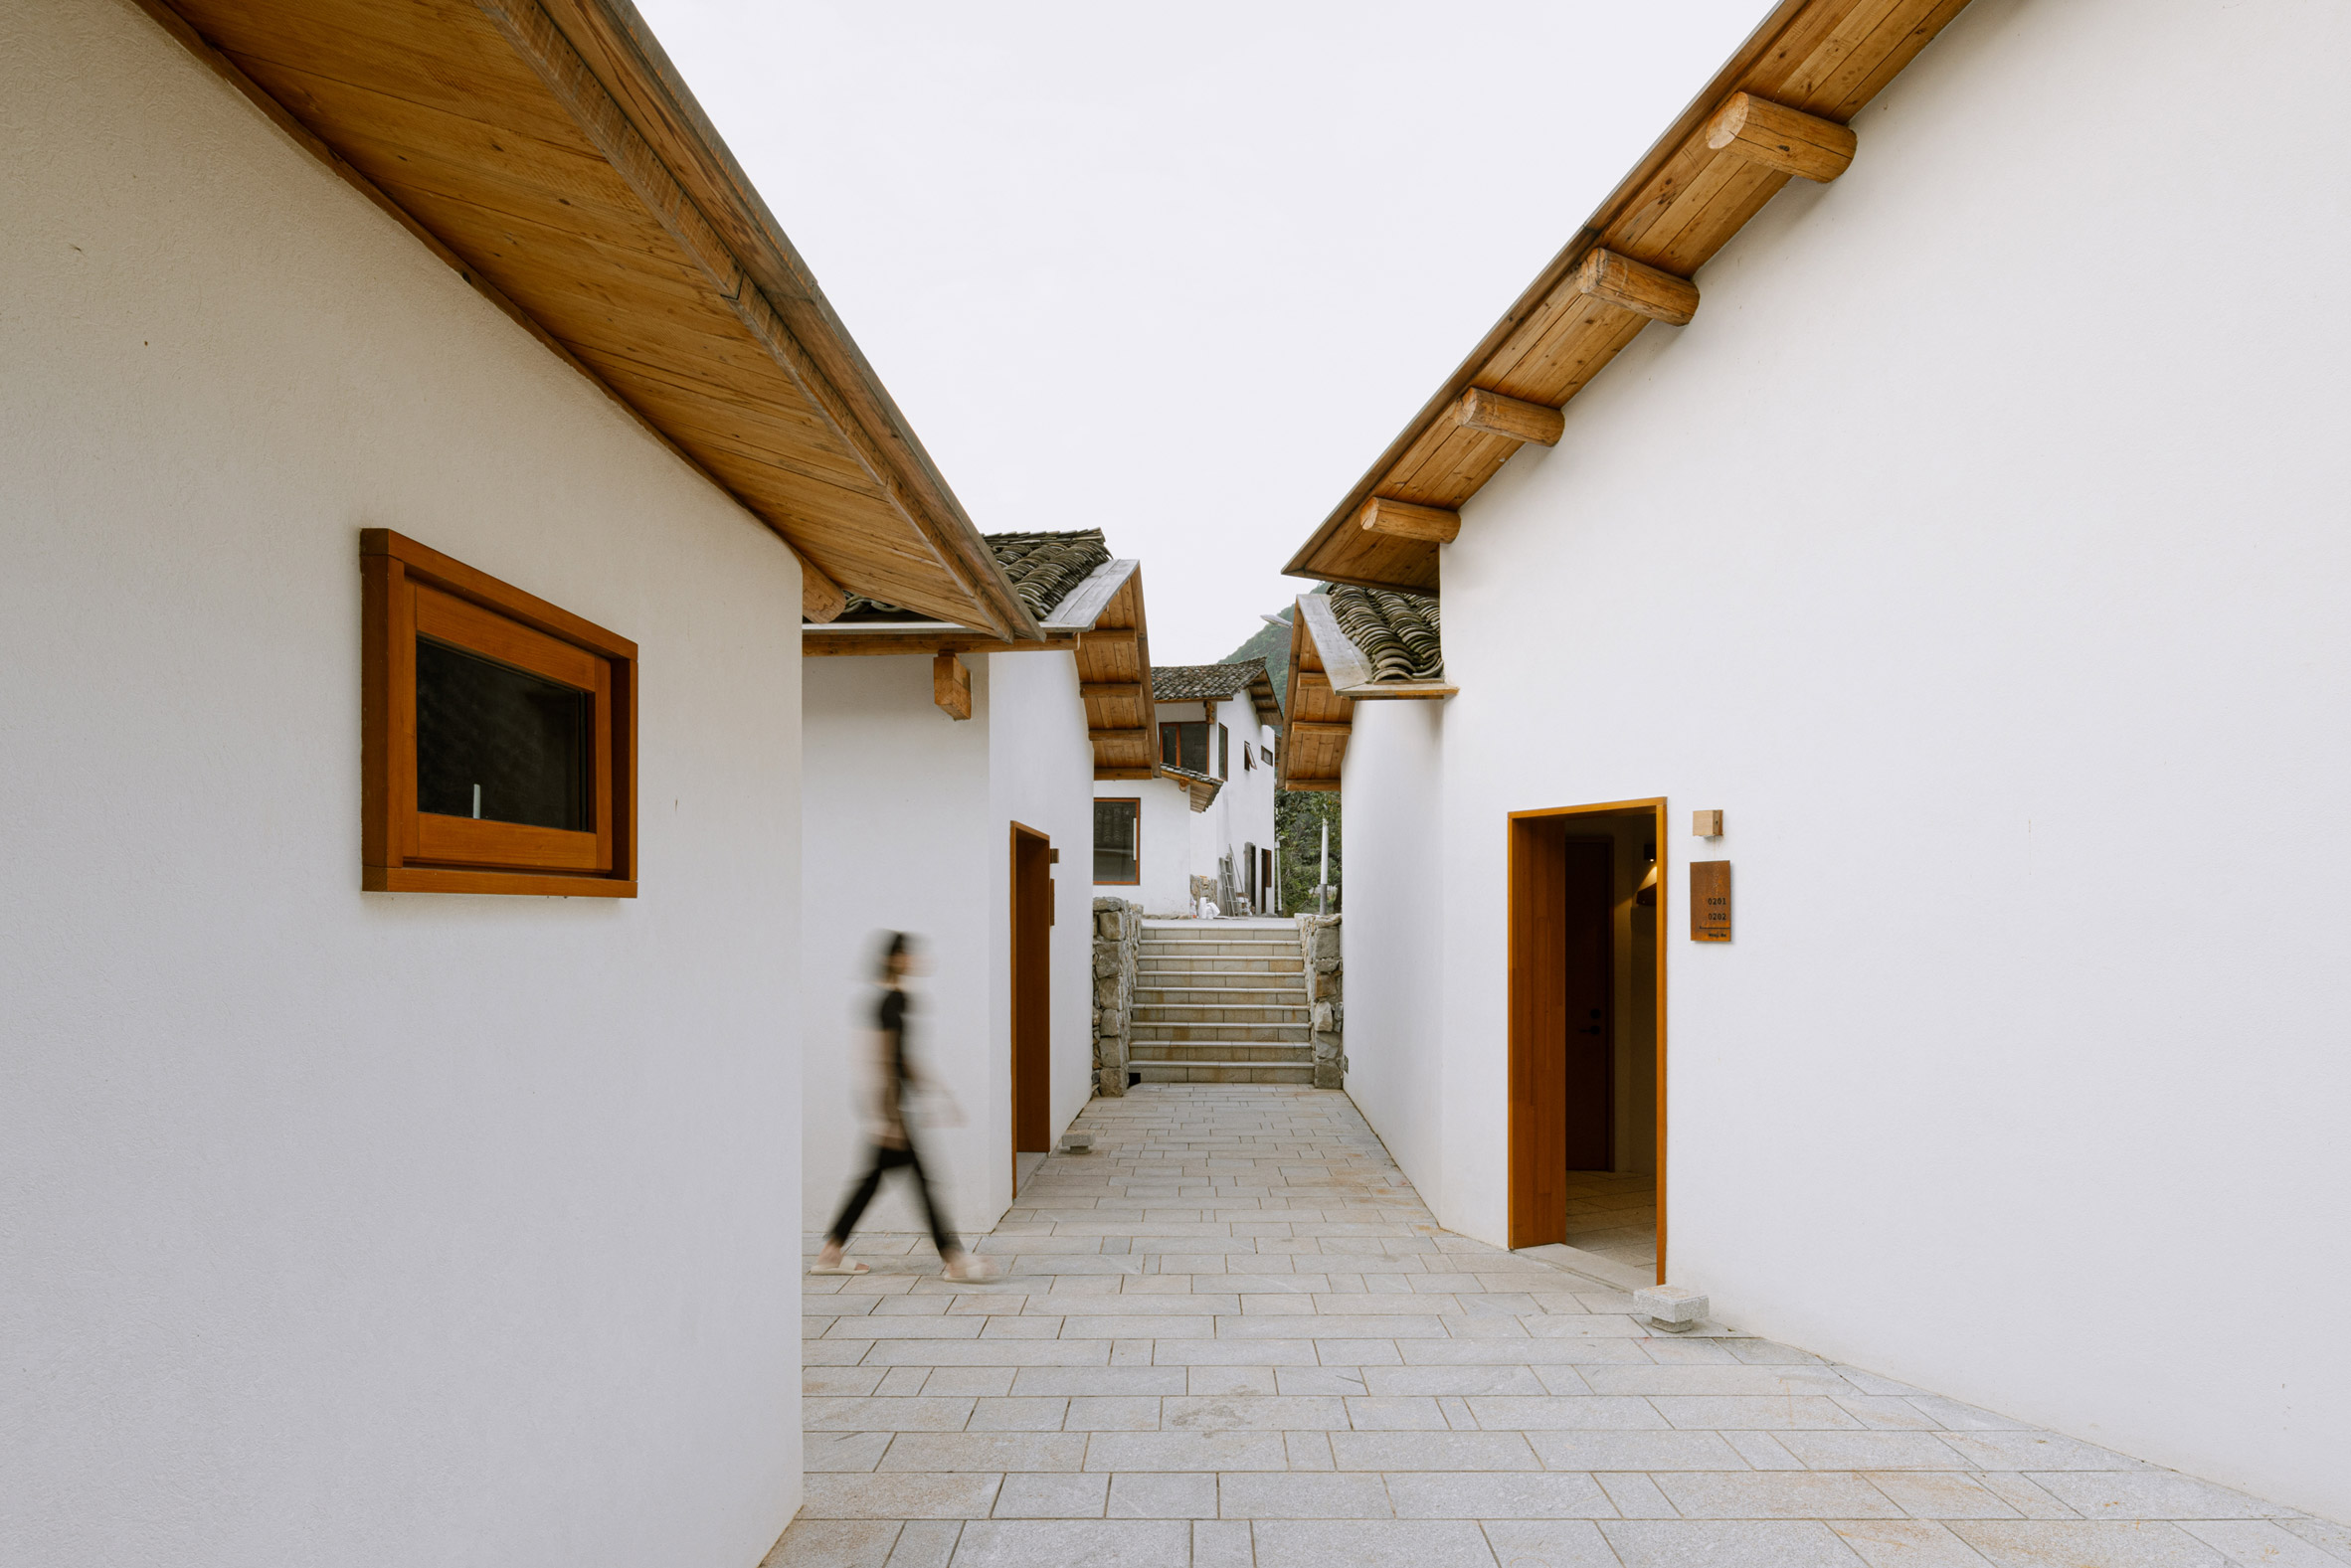 Circulation between the Ningshan Luzhai Cottages in Ankang City, China, by Kooo Architects